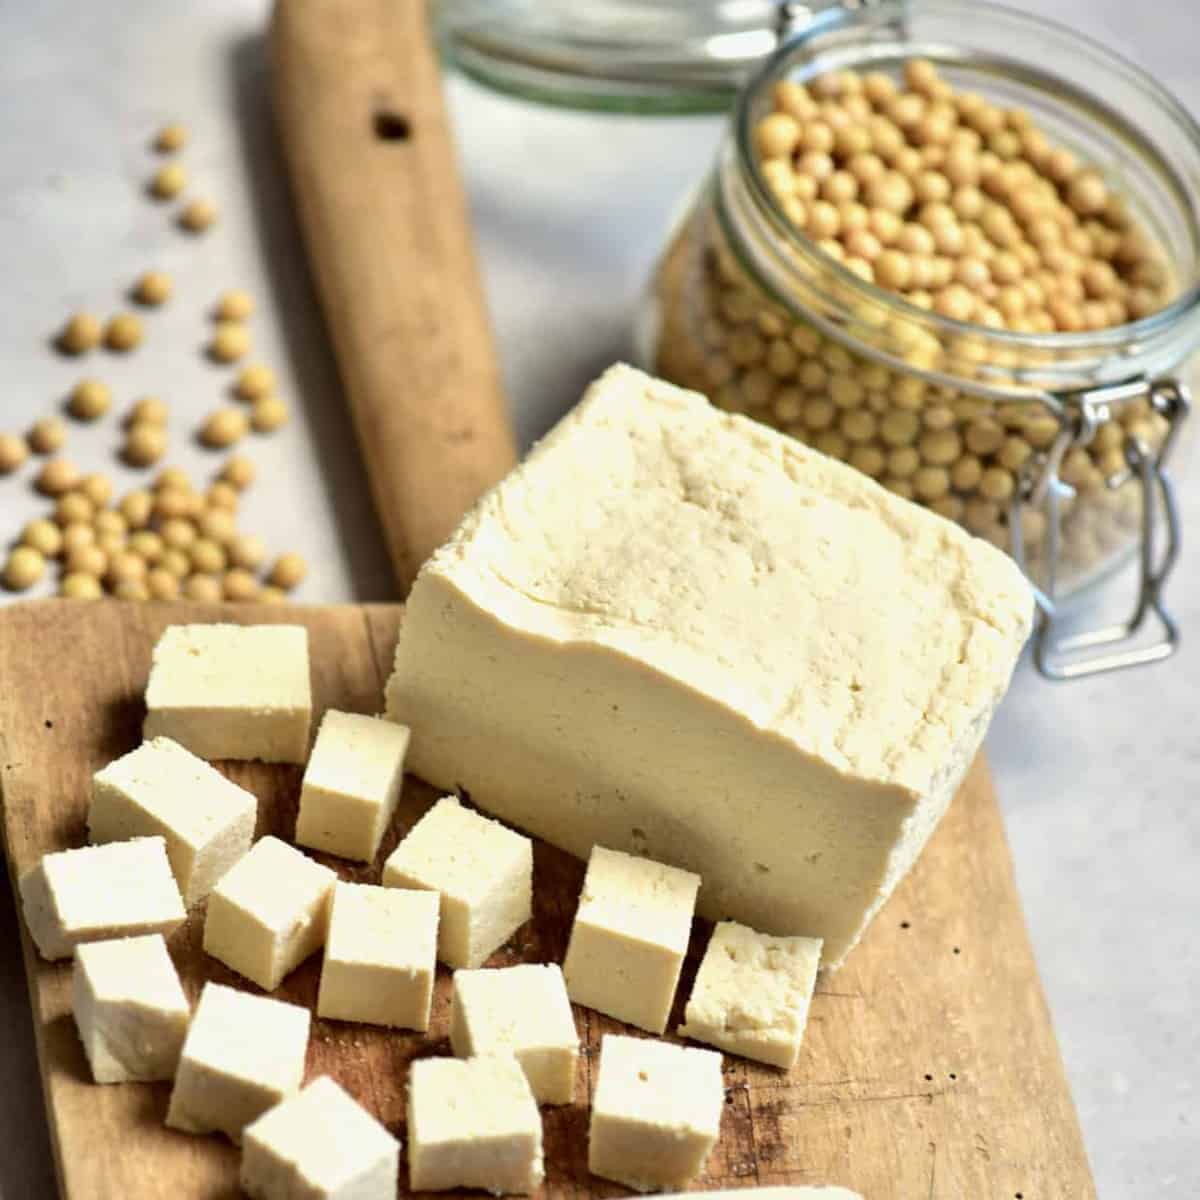 Tofu and soybeans